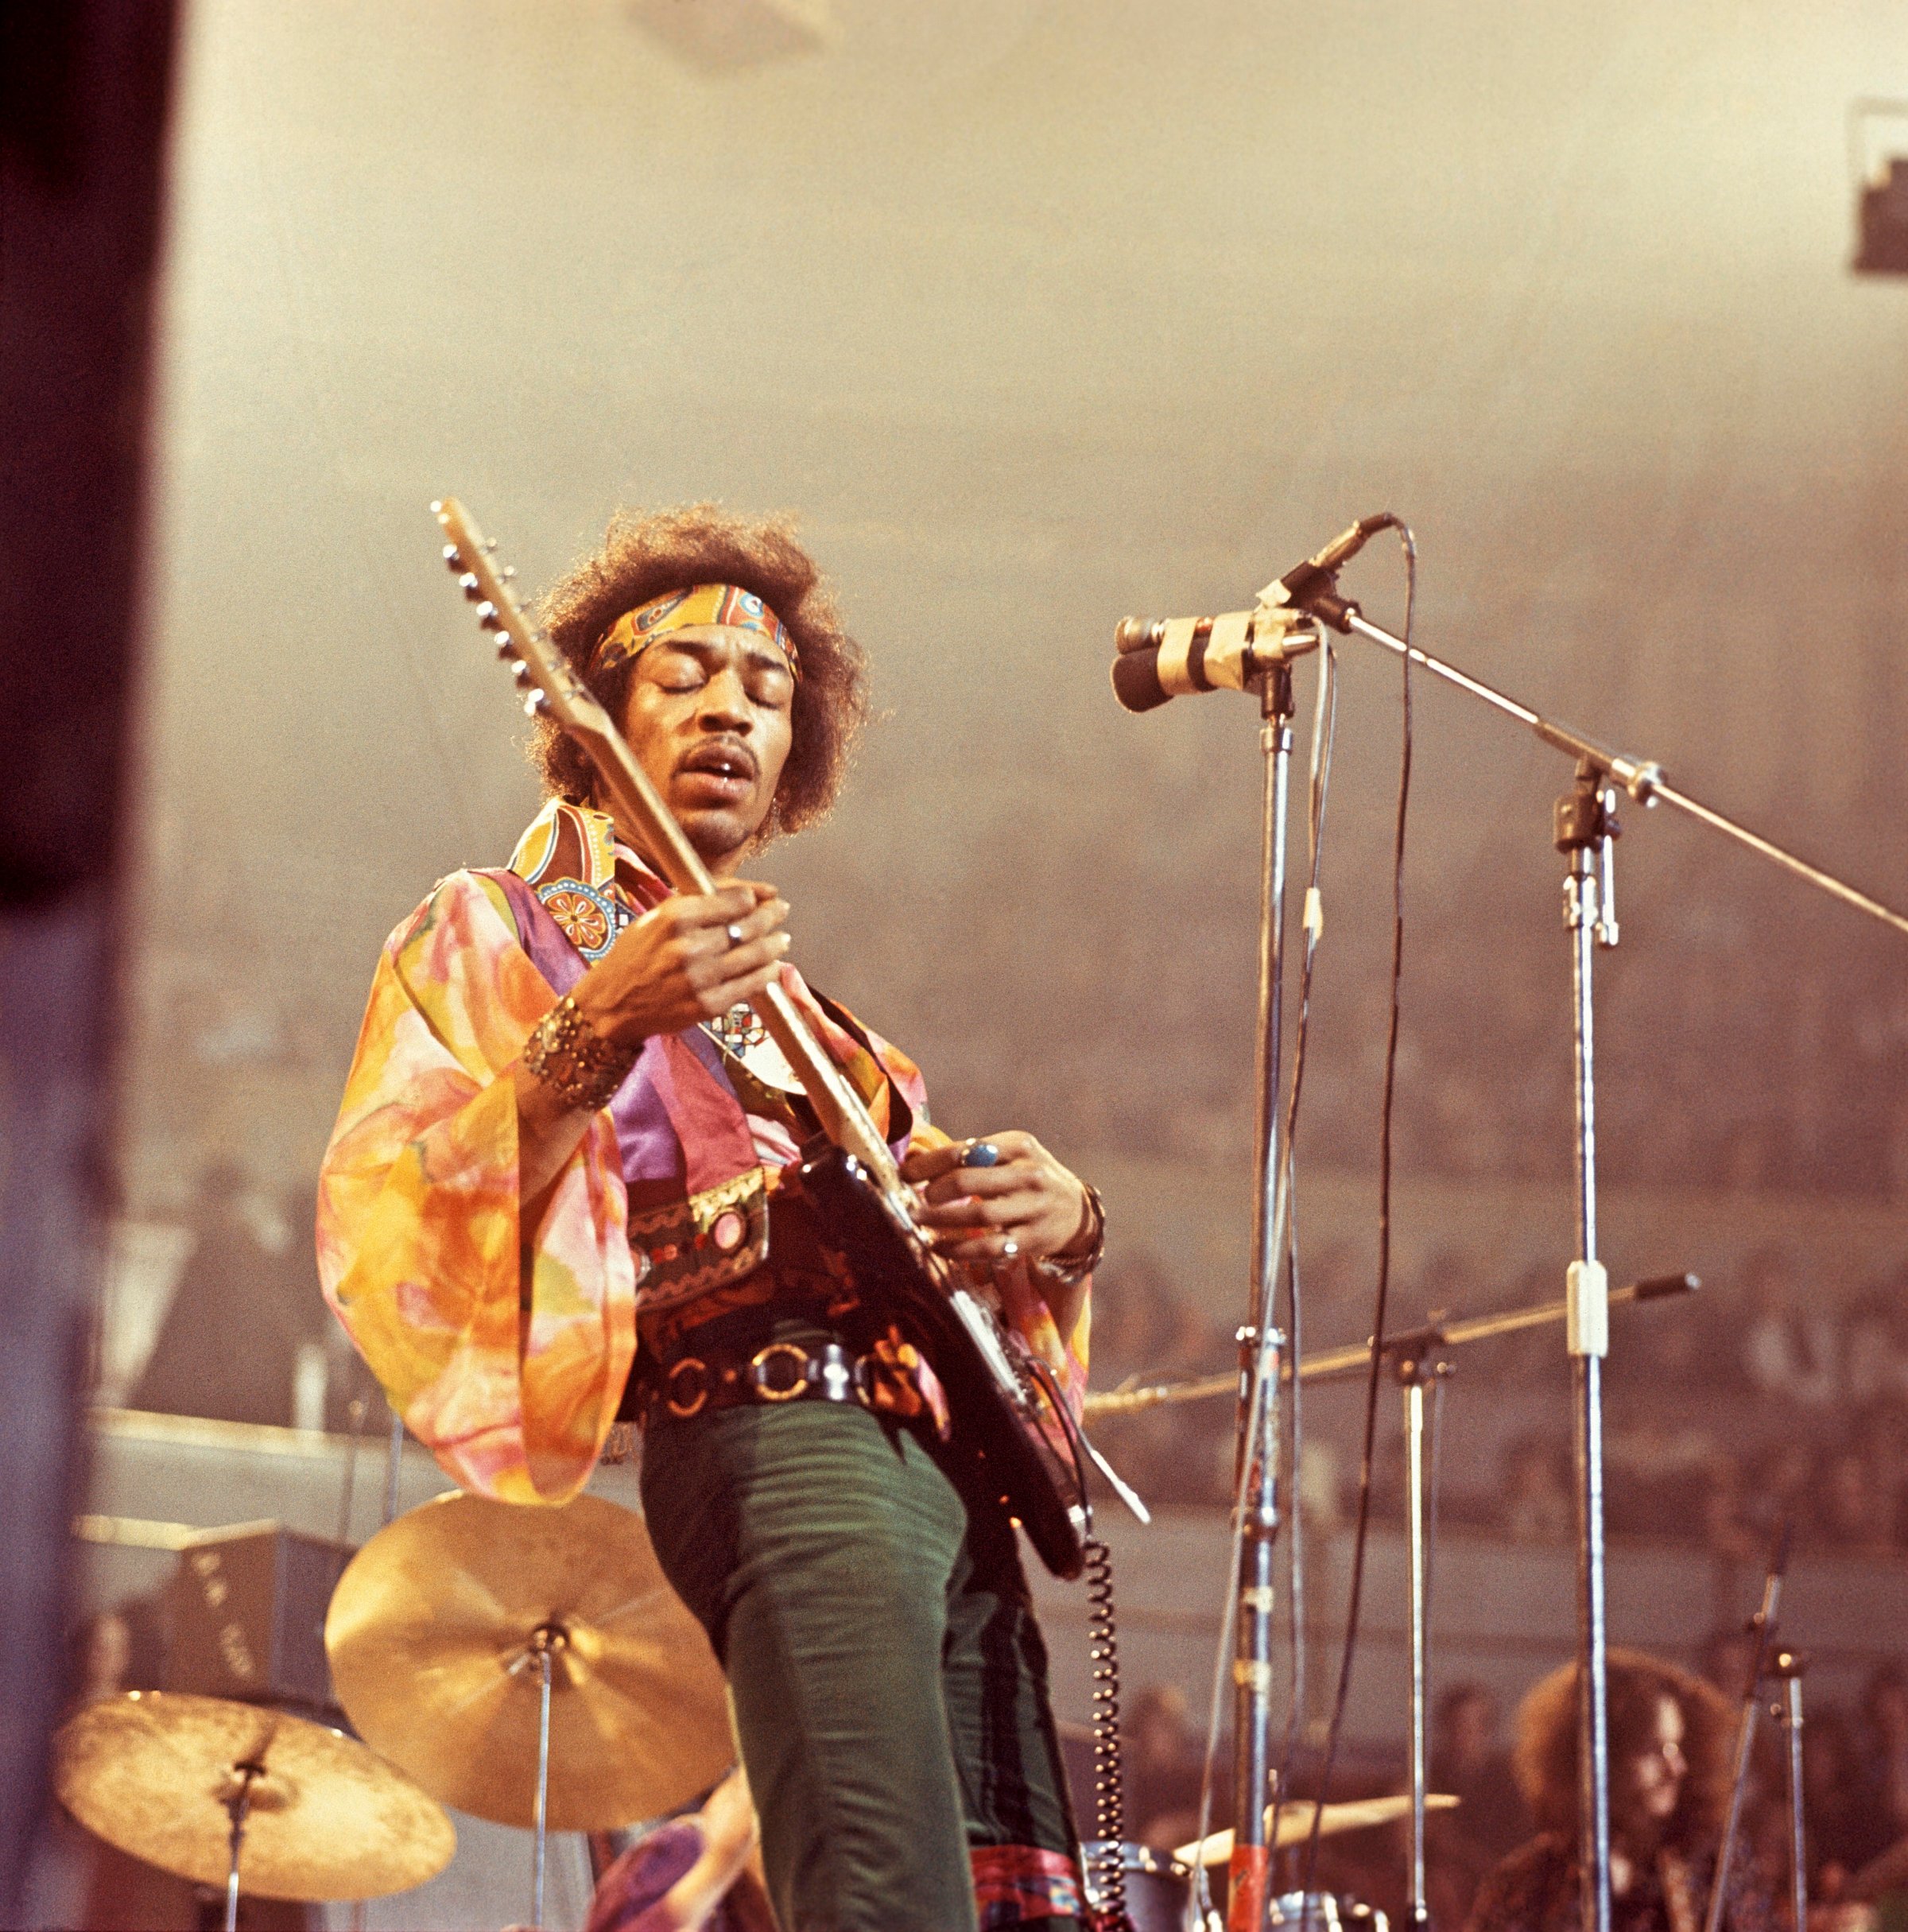 Jimi Hendrix performs at the Royal Albert Hall in London on Feb. 24, 1969.